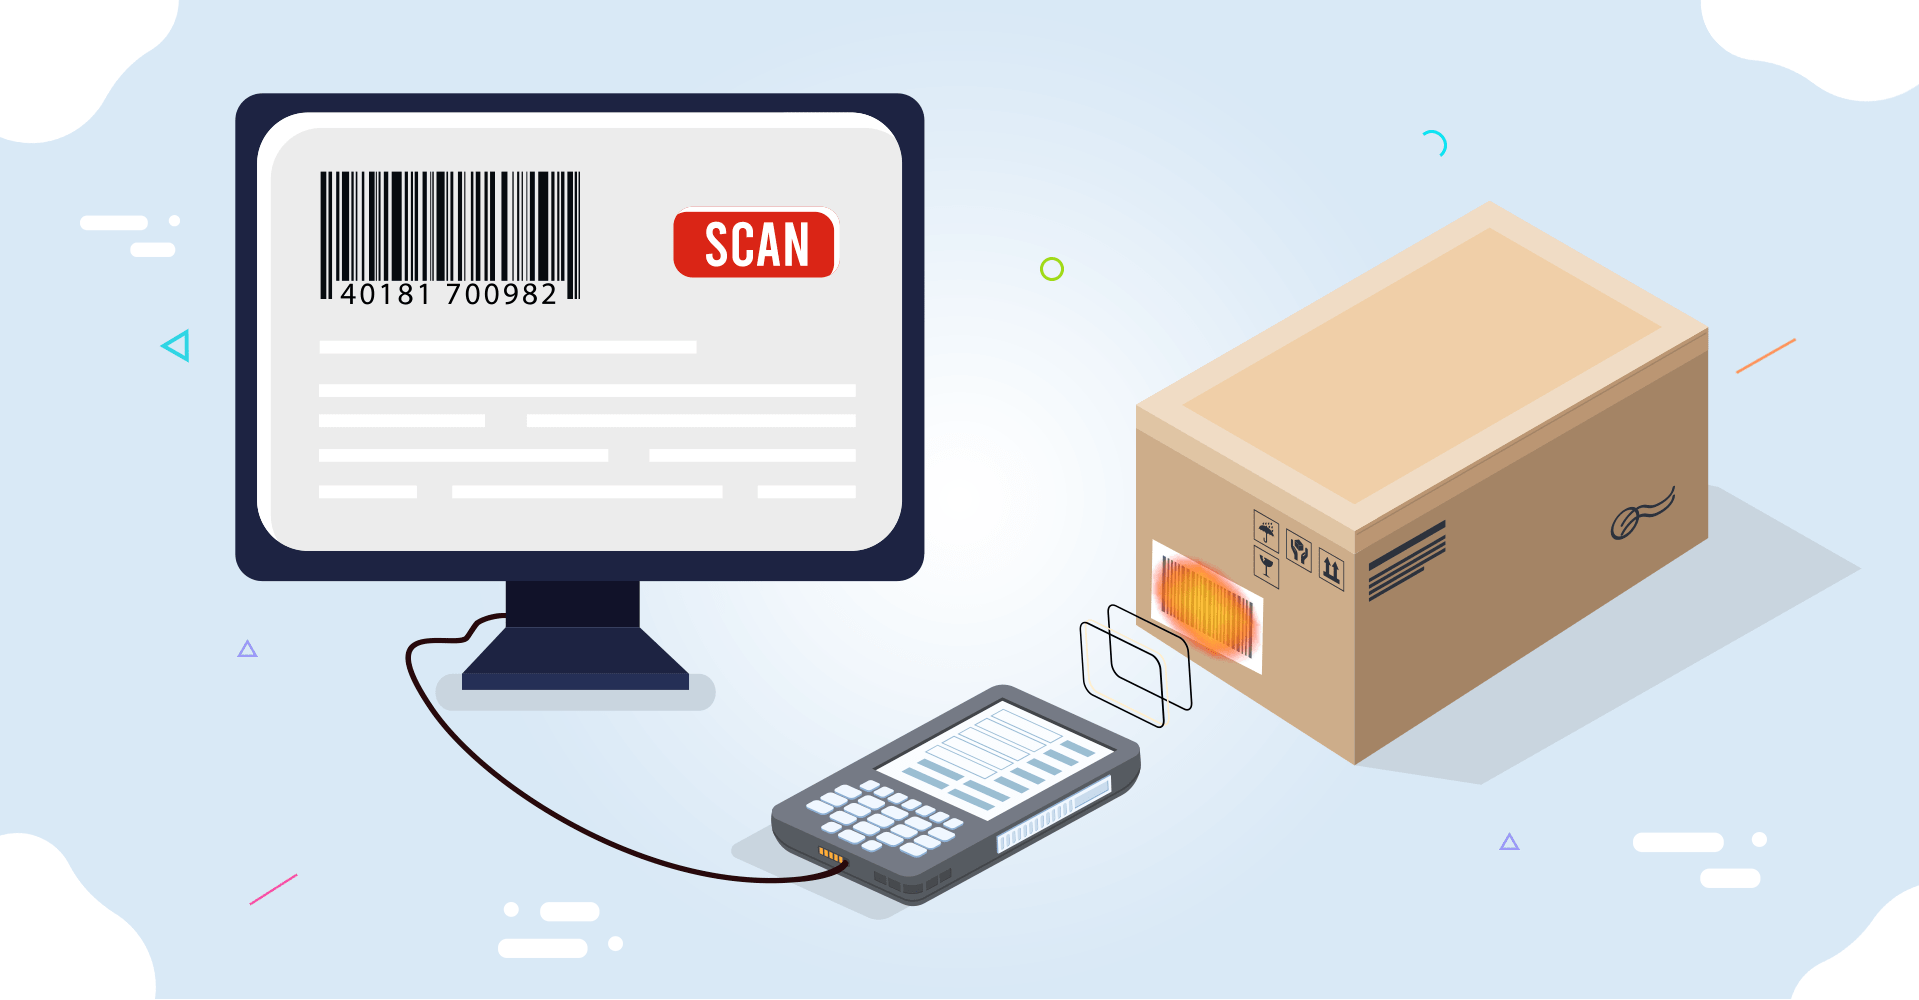 How to scan upc codes for amazon